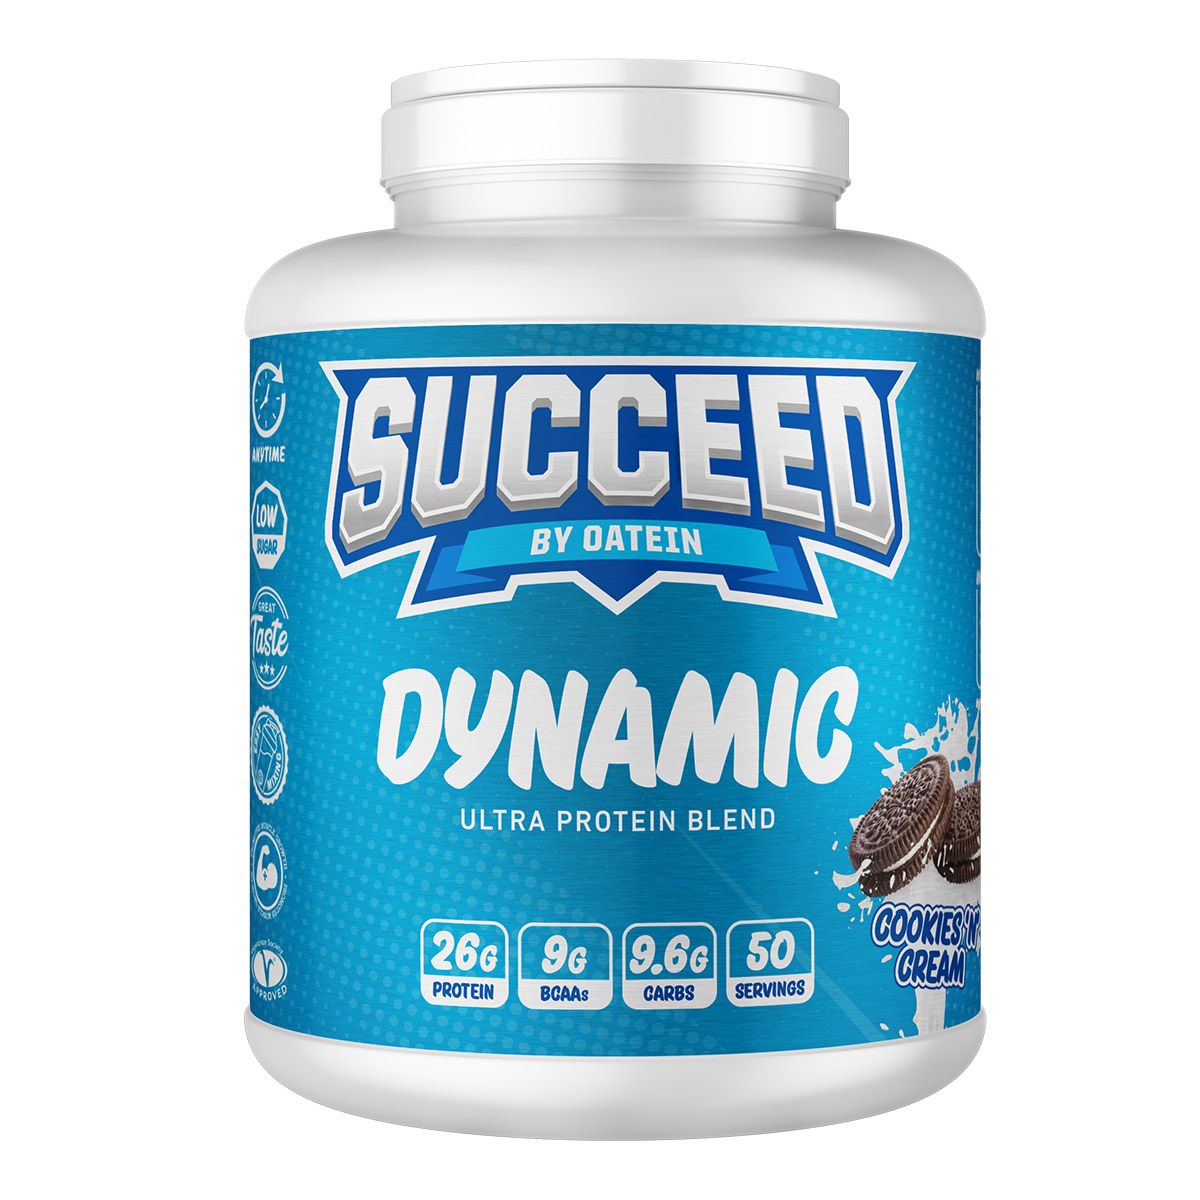 Oatein Succeed Dynamic Protein Blend - Cookies & Creme 2kg